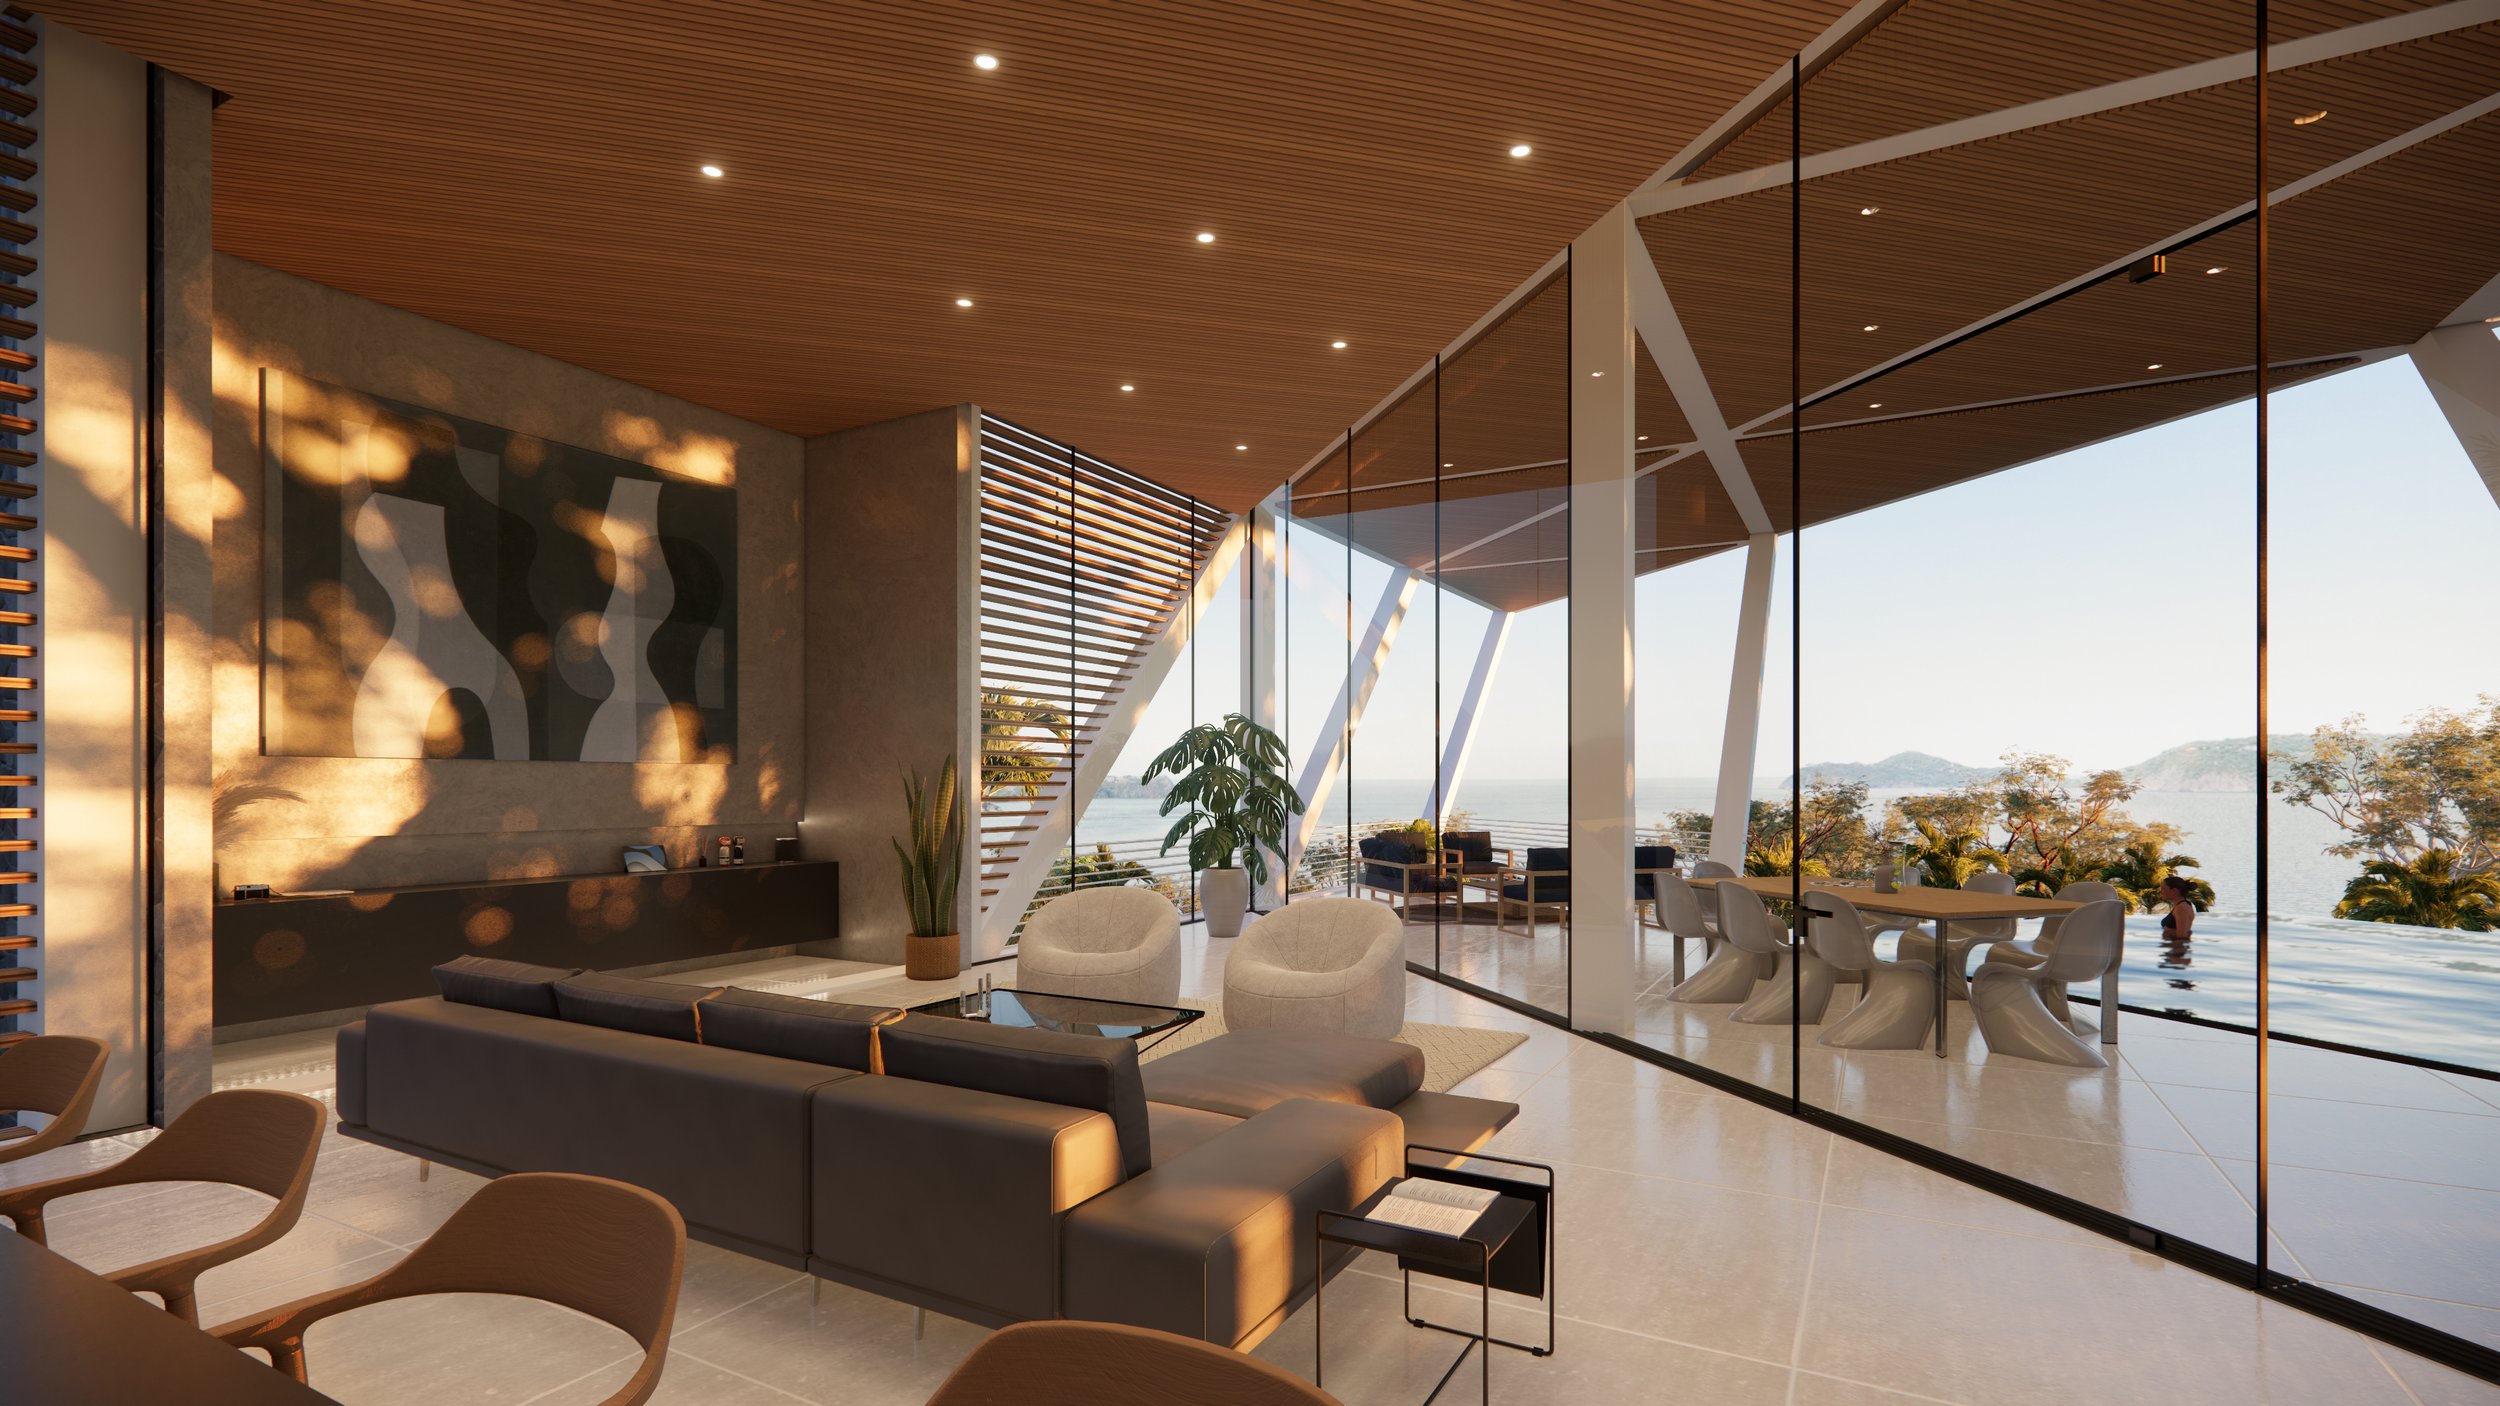 Incorporating open floor plans, large windows and extensive use of natural materials allowing for natural light, ventilation and expansive views of the ocean and nearby landscapes.